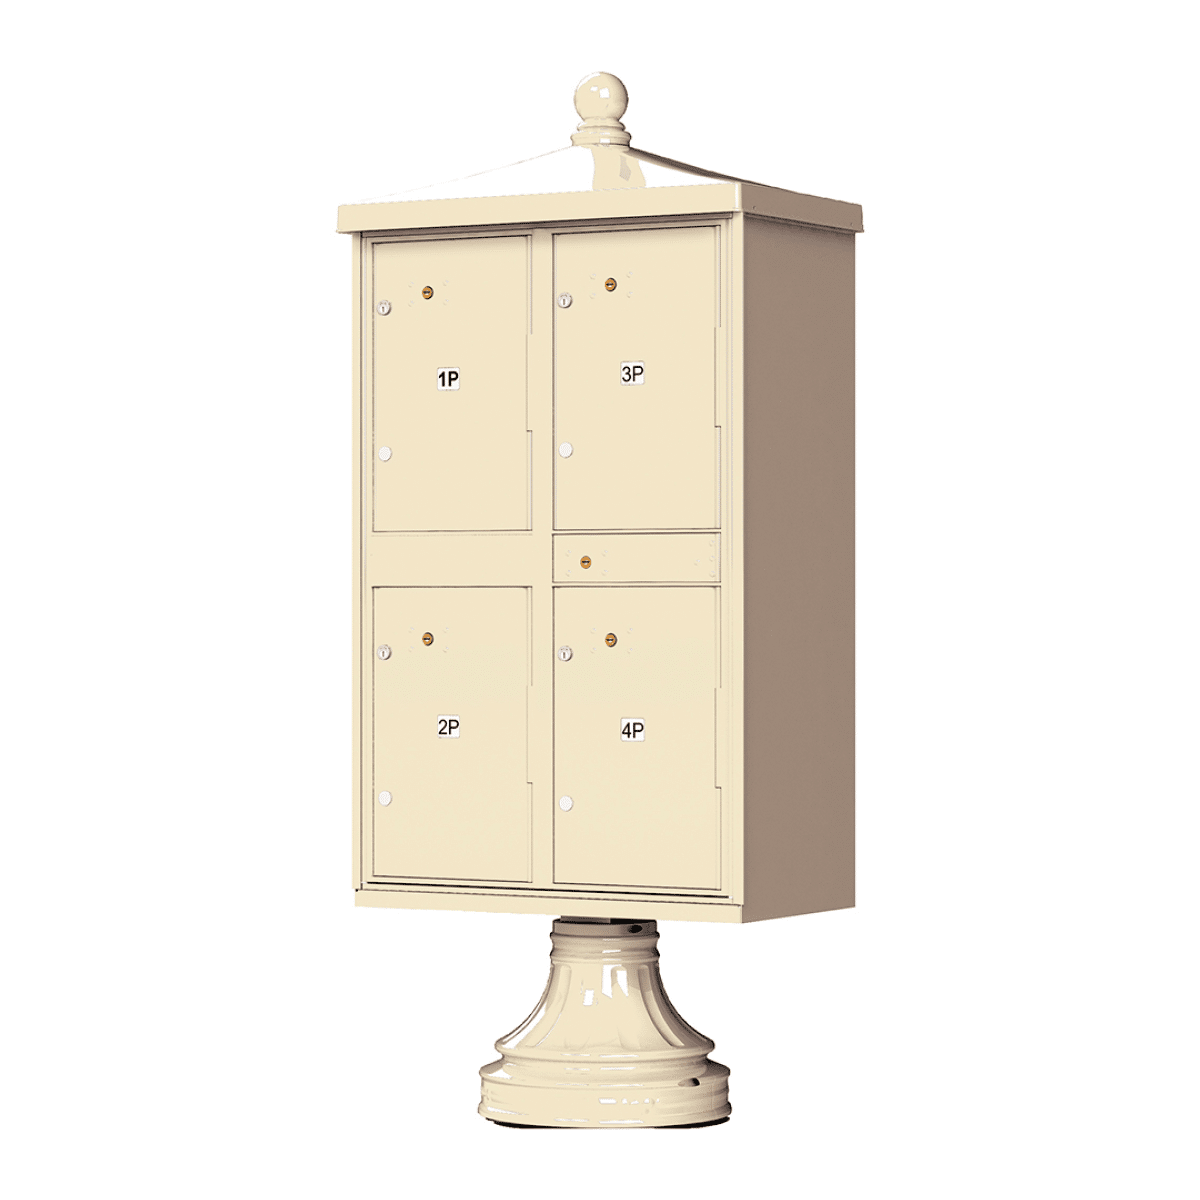 Florence CBU Cluster Mailbox – Vogue Traditional Kit, 4 Parcel Lockers Product Image